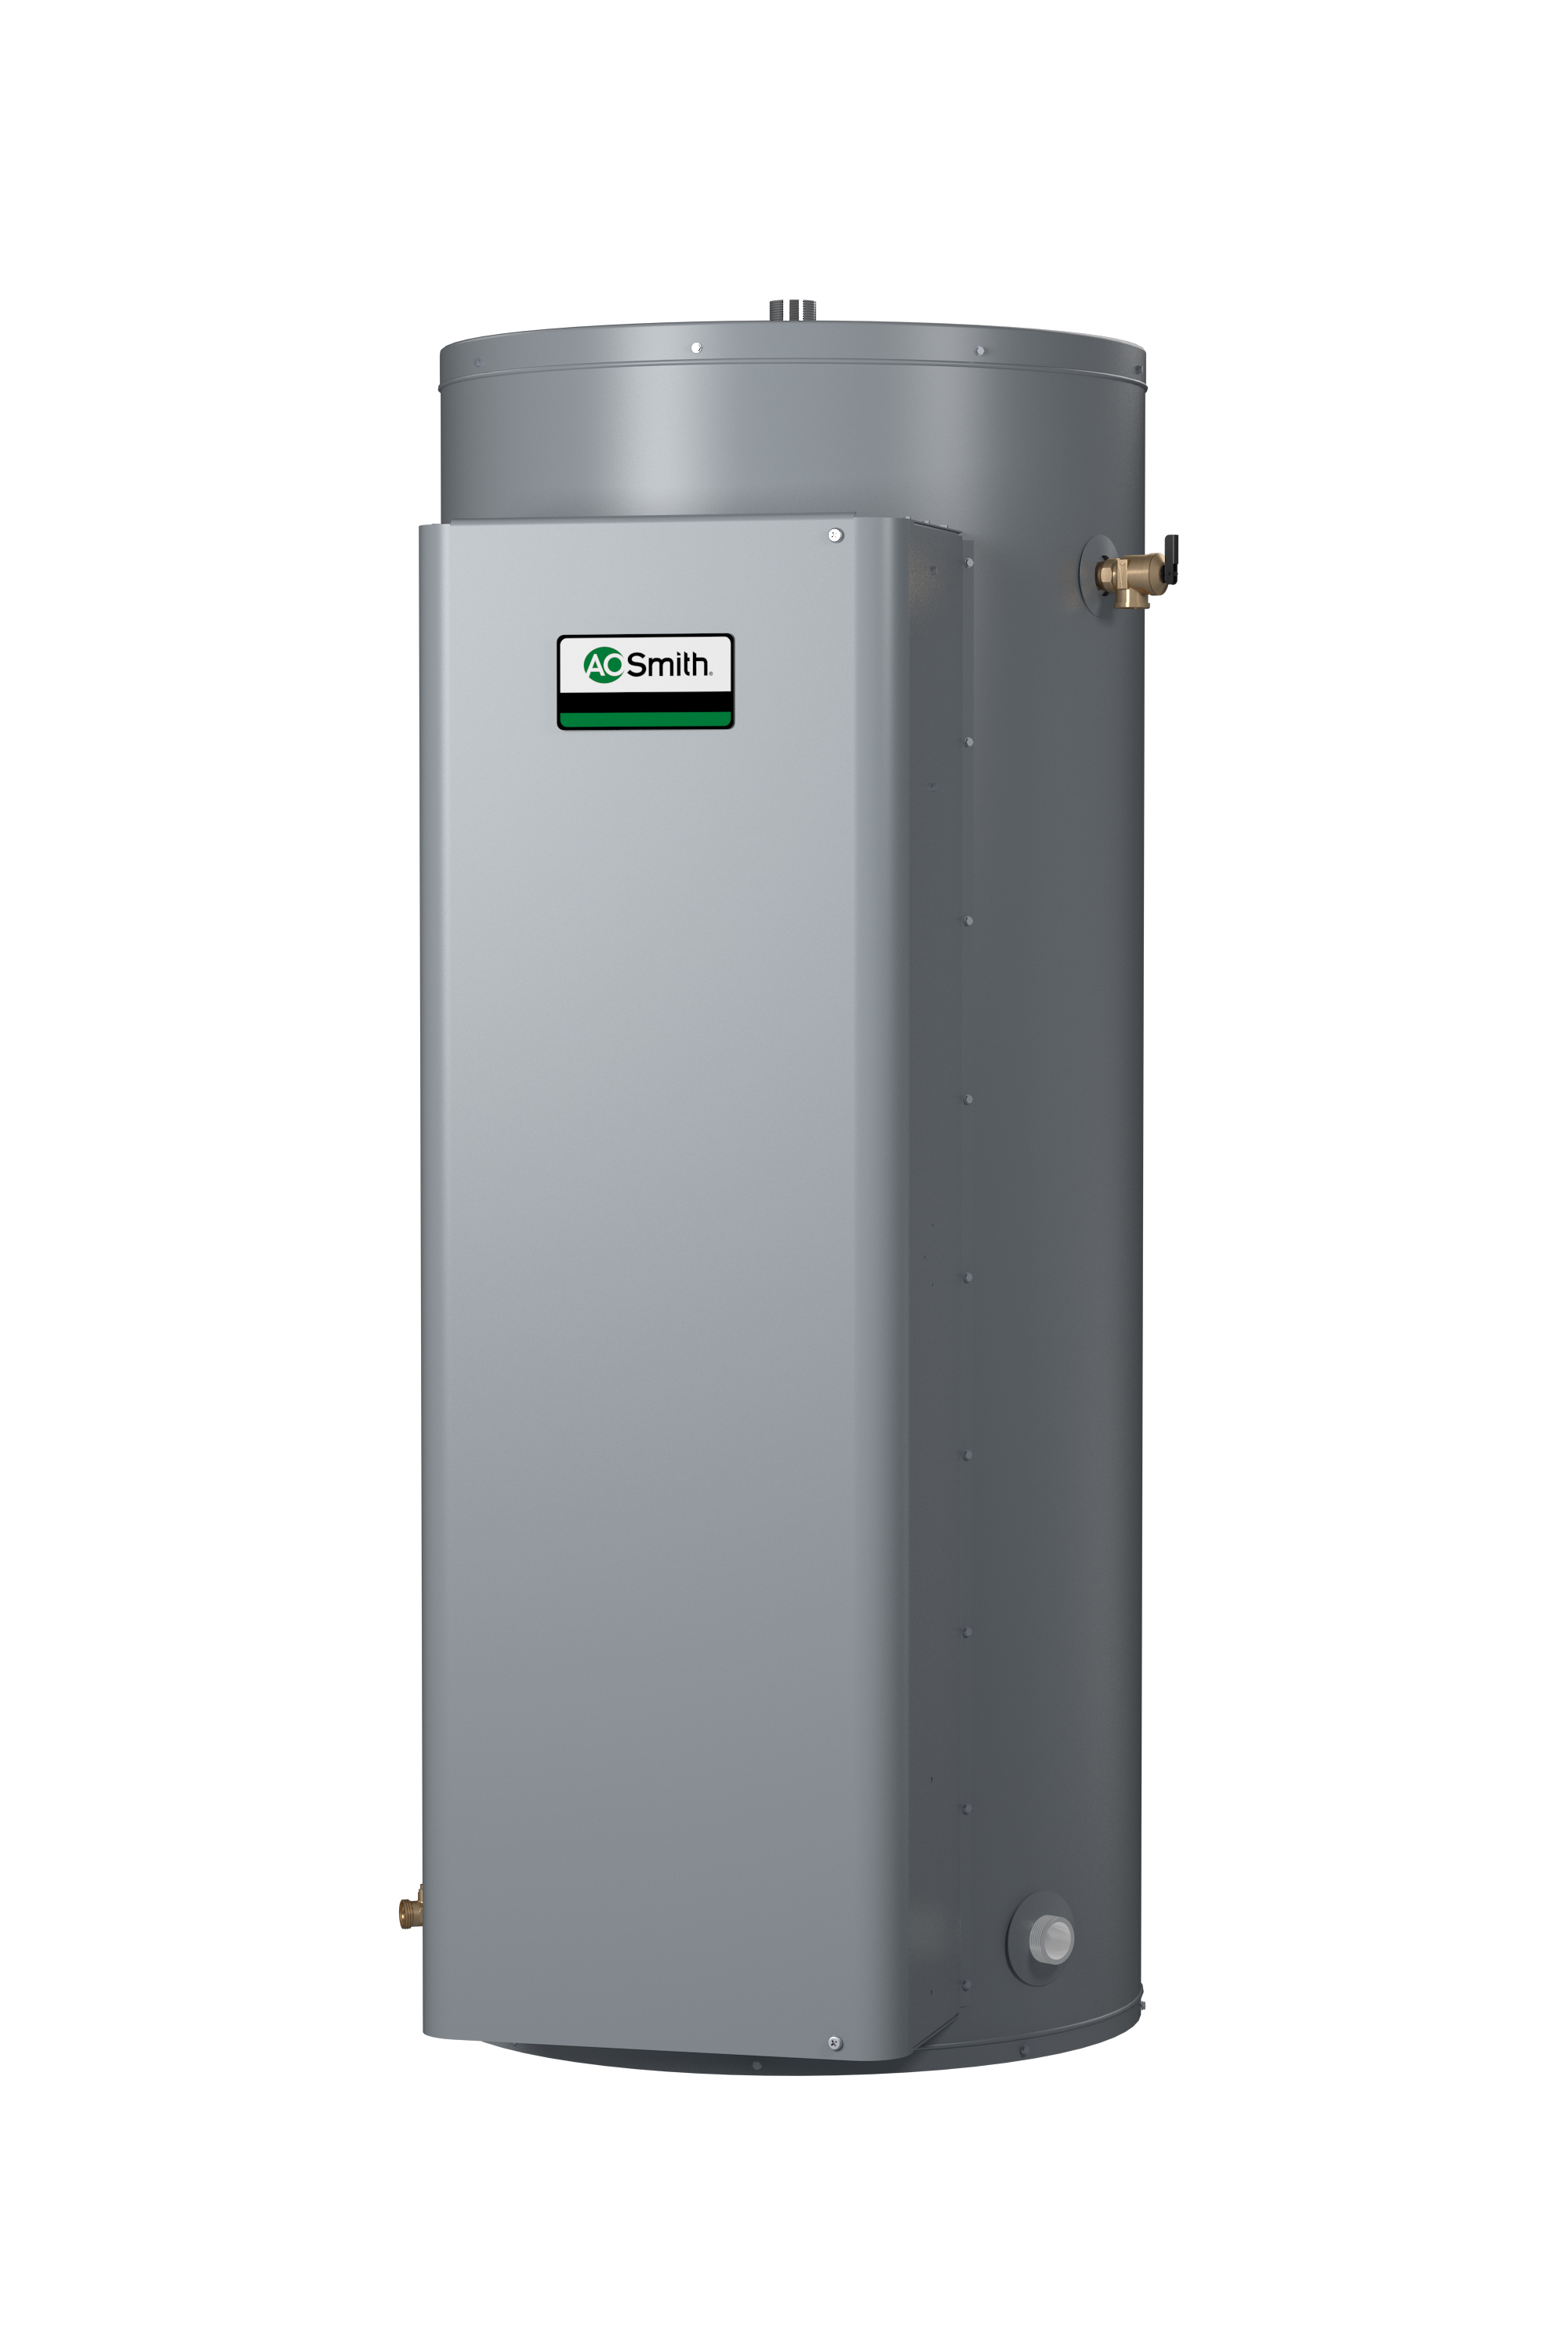 AO SMITH DVE-120-24, 119 GALLONS, 24.0KW, 240 VOLT, 100 AMPS, 1 PHASE, 6 ELEMENT, GOLD Xi SERIES HEAVY DUTY COMMERCIAL ELECTRIC WATER HEATER